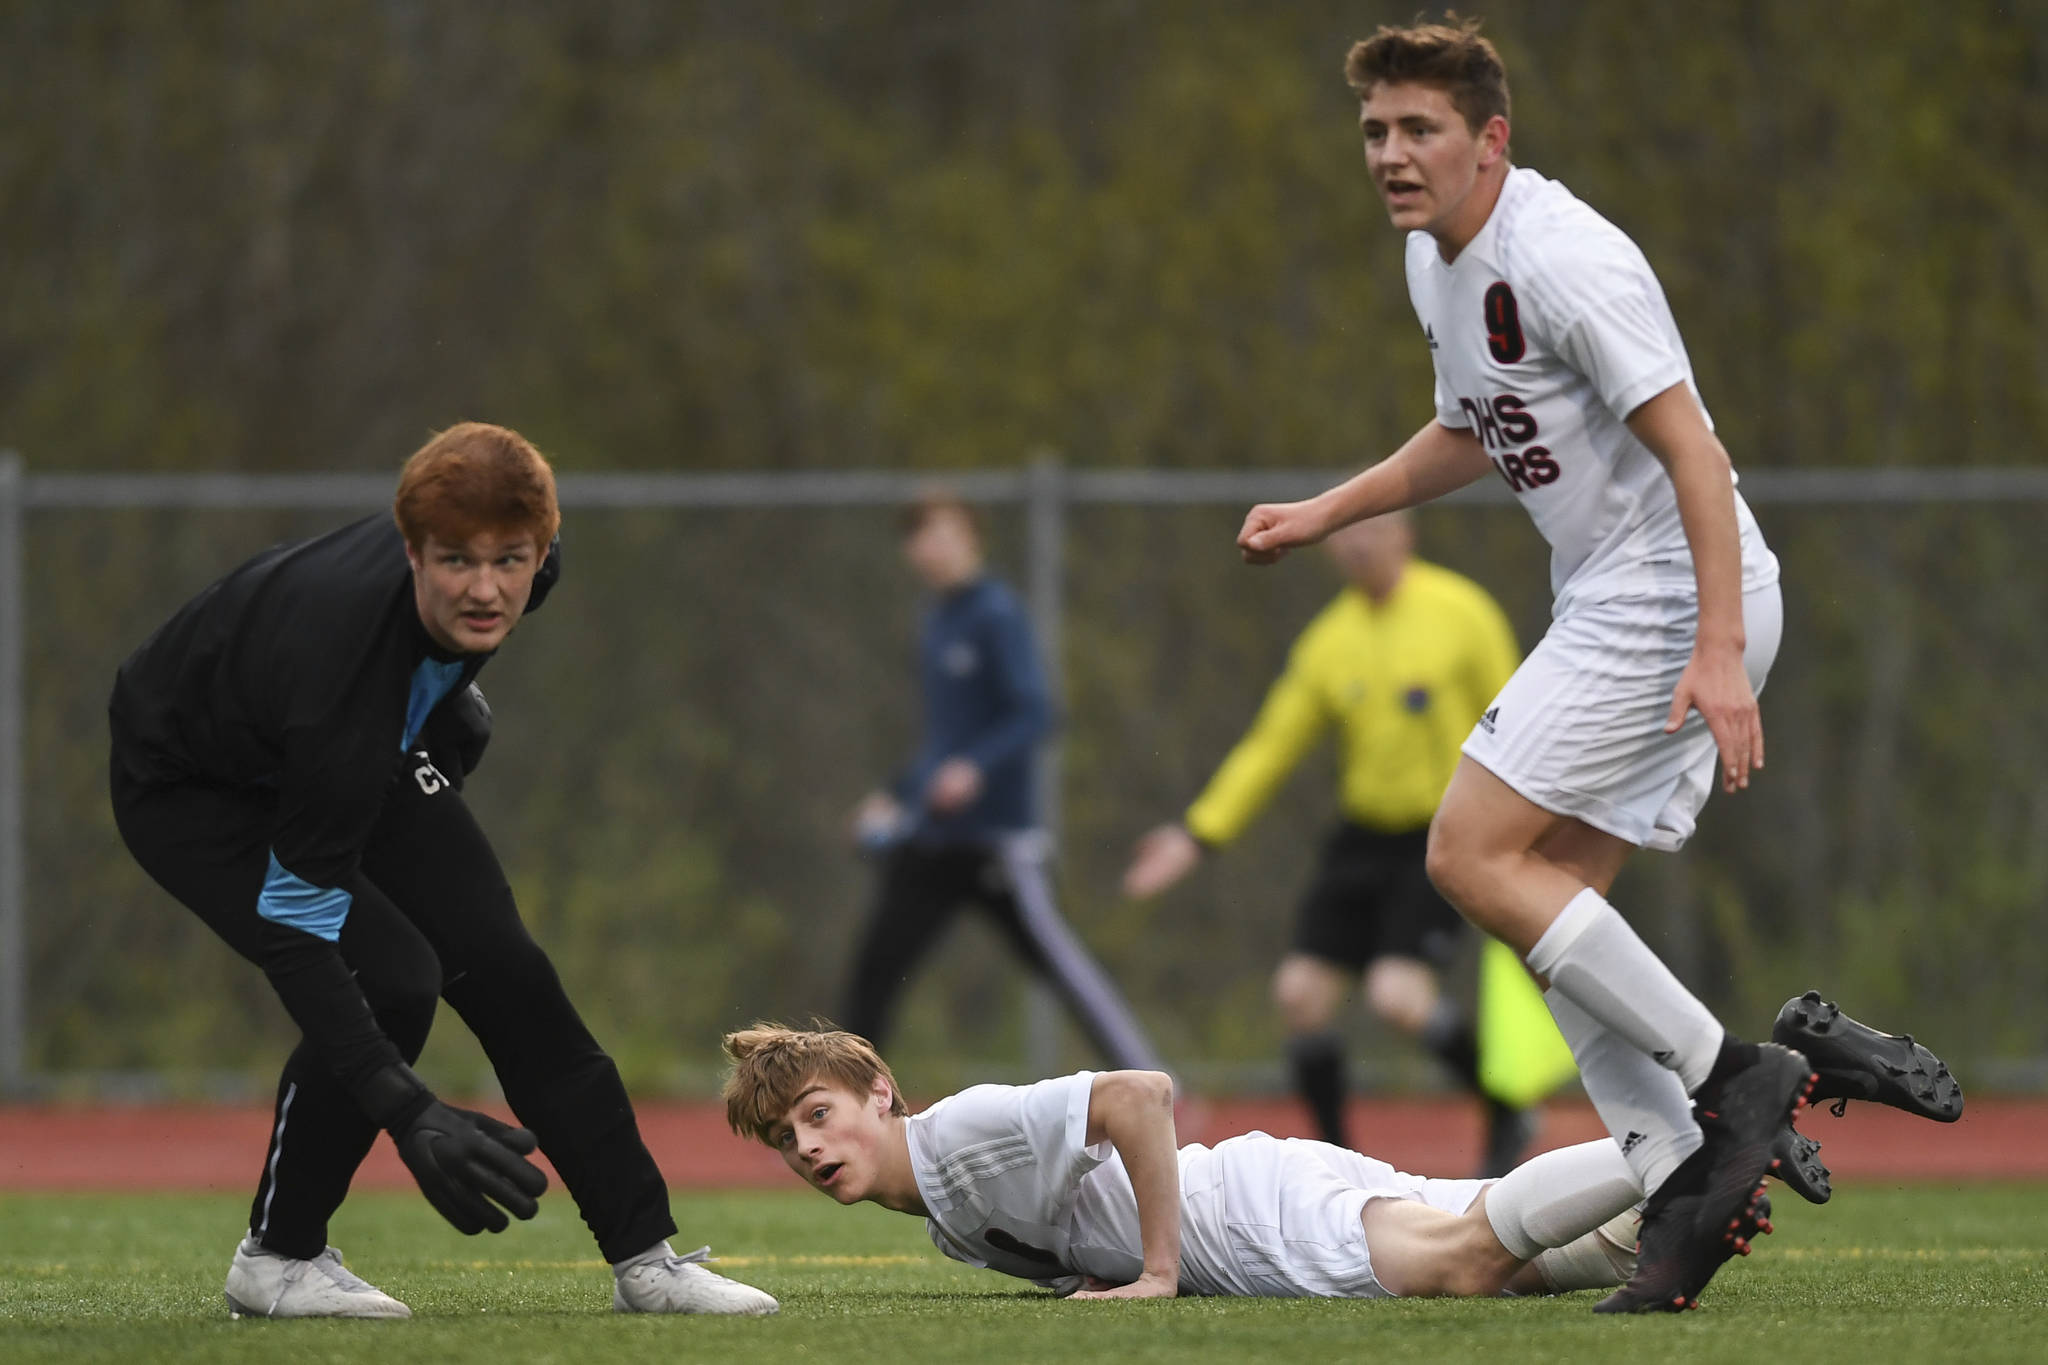 Juneau-Douglas’ Koby Goldstein, center, watches his goal shot get by Thunder Mountain’s goalkeeper Caleb Traxler at TMHS on Tuesday, May 14, 2019. JDHS won 5-1. (Michael Penn | Juneau Empire)